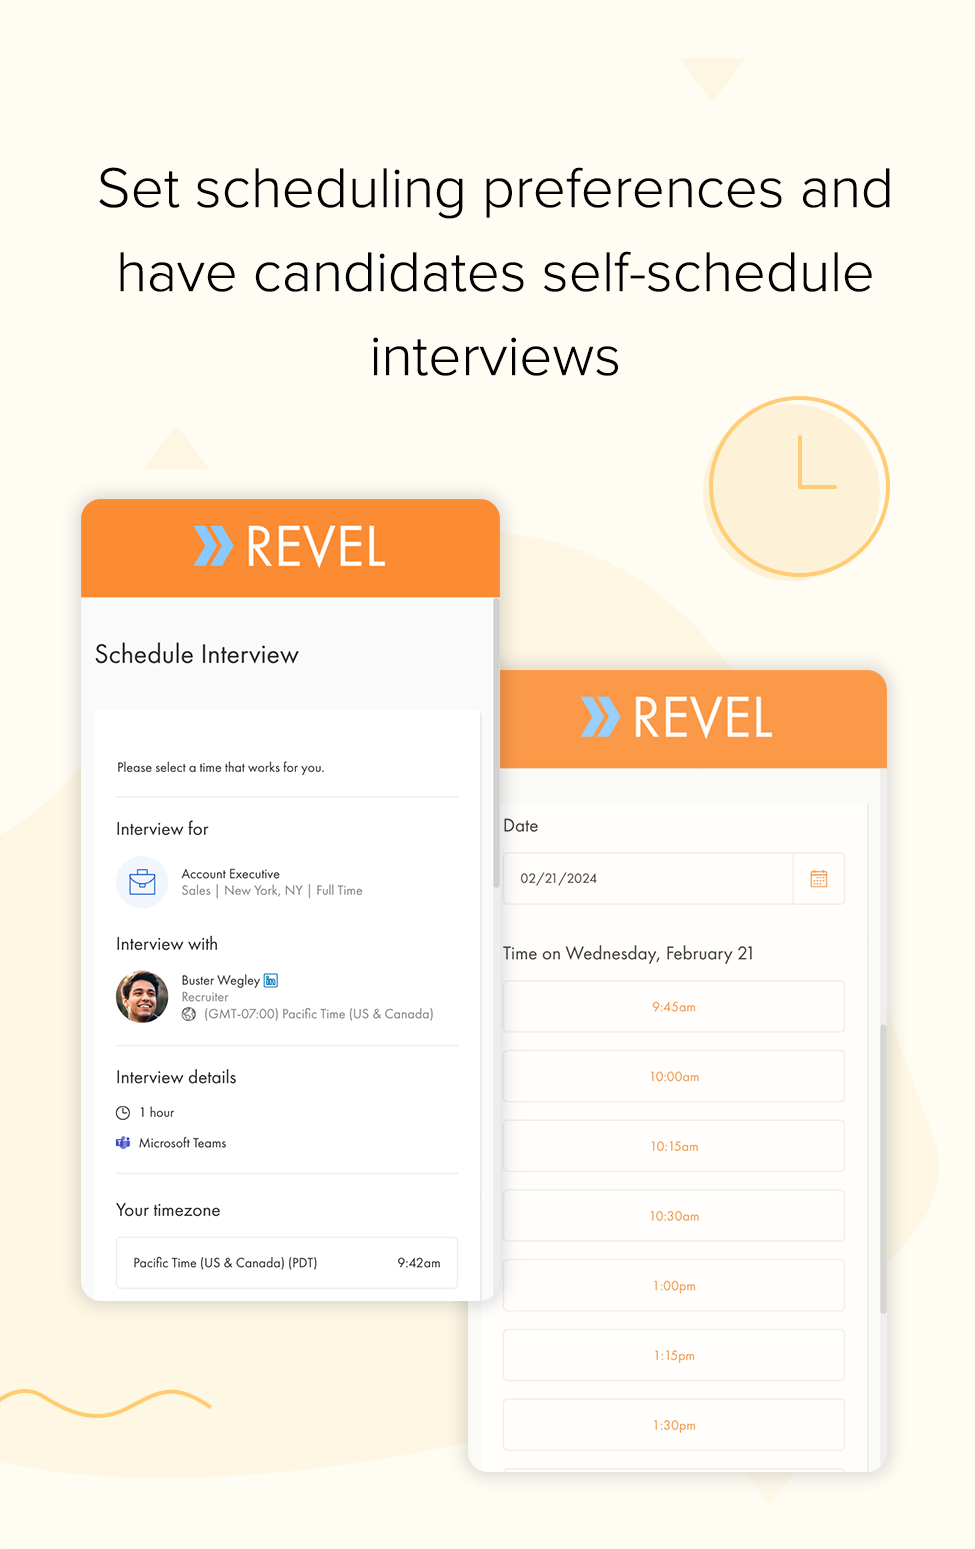 Set preferences and have candidates self-schedule interviews | mobile recruiting software schedules